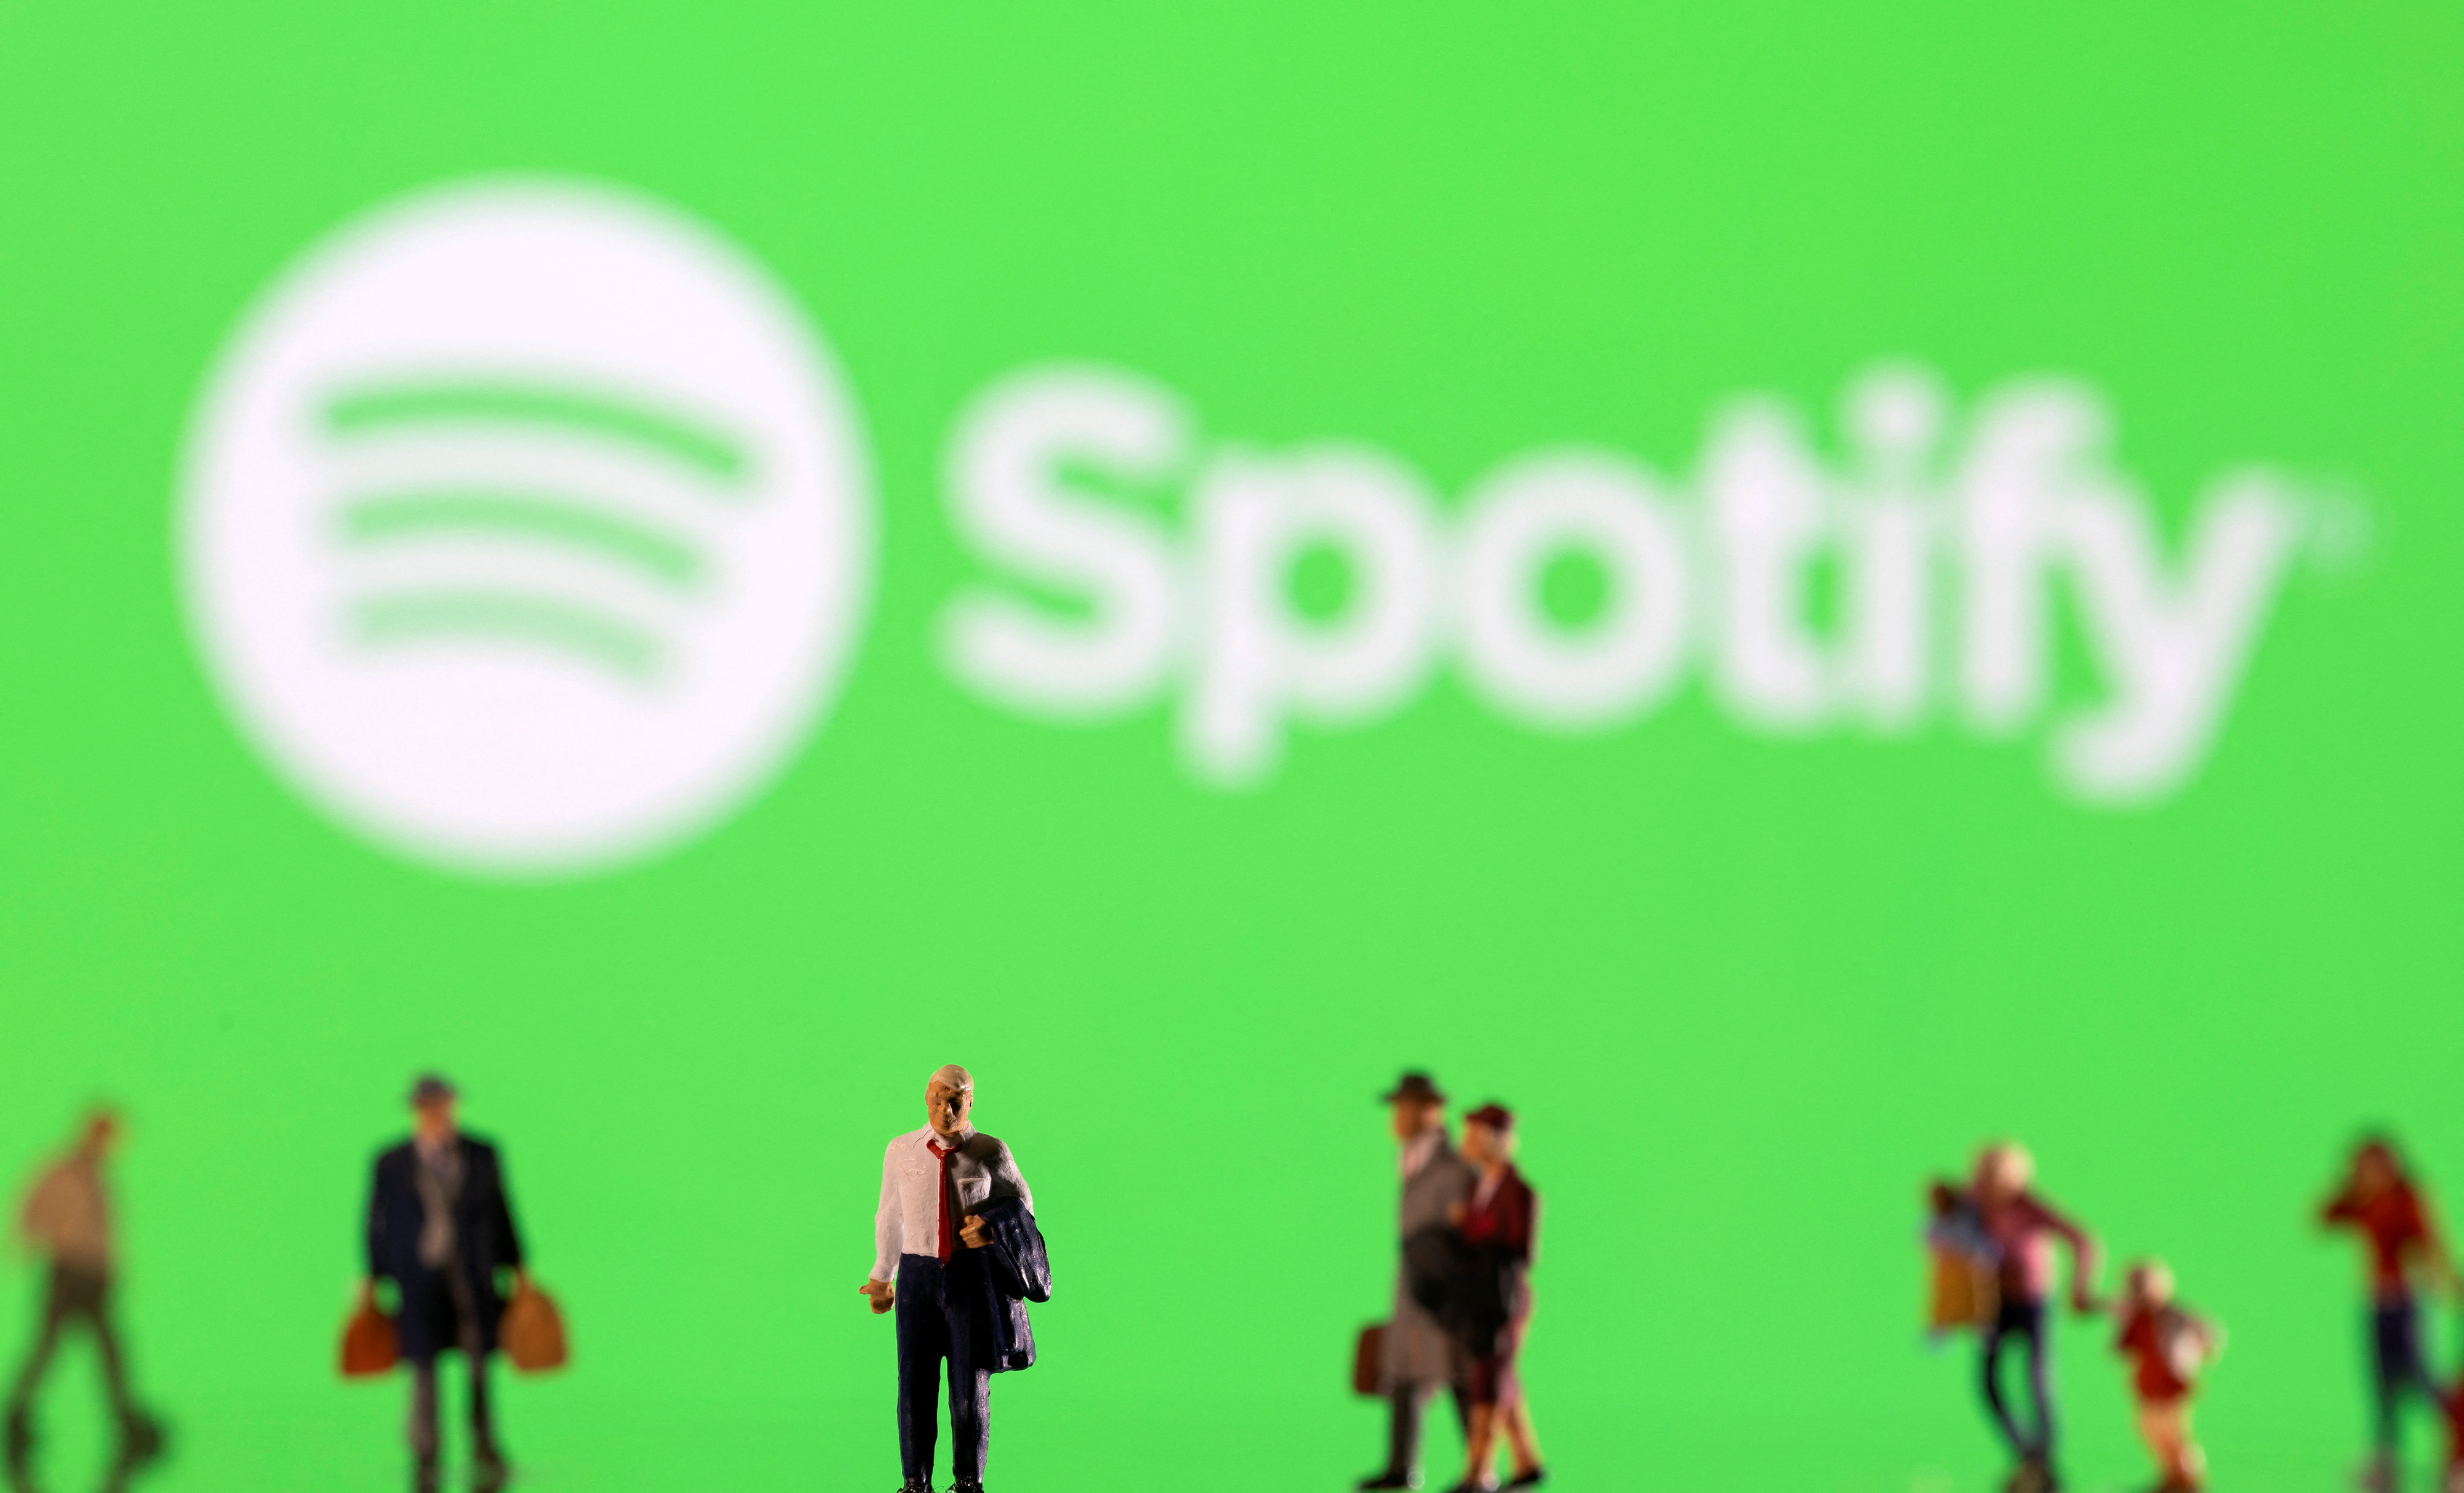 Millions of users use Spotify around the world (Image: REUTERS/Dado Ruvic/Illustration)